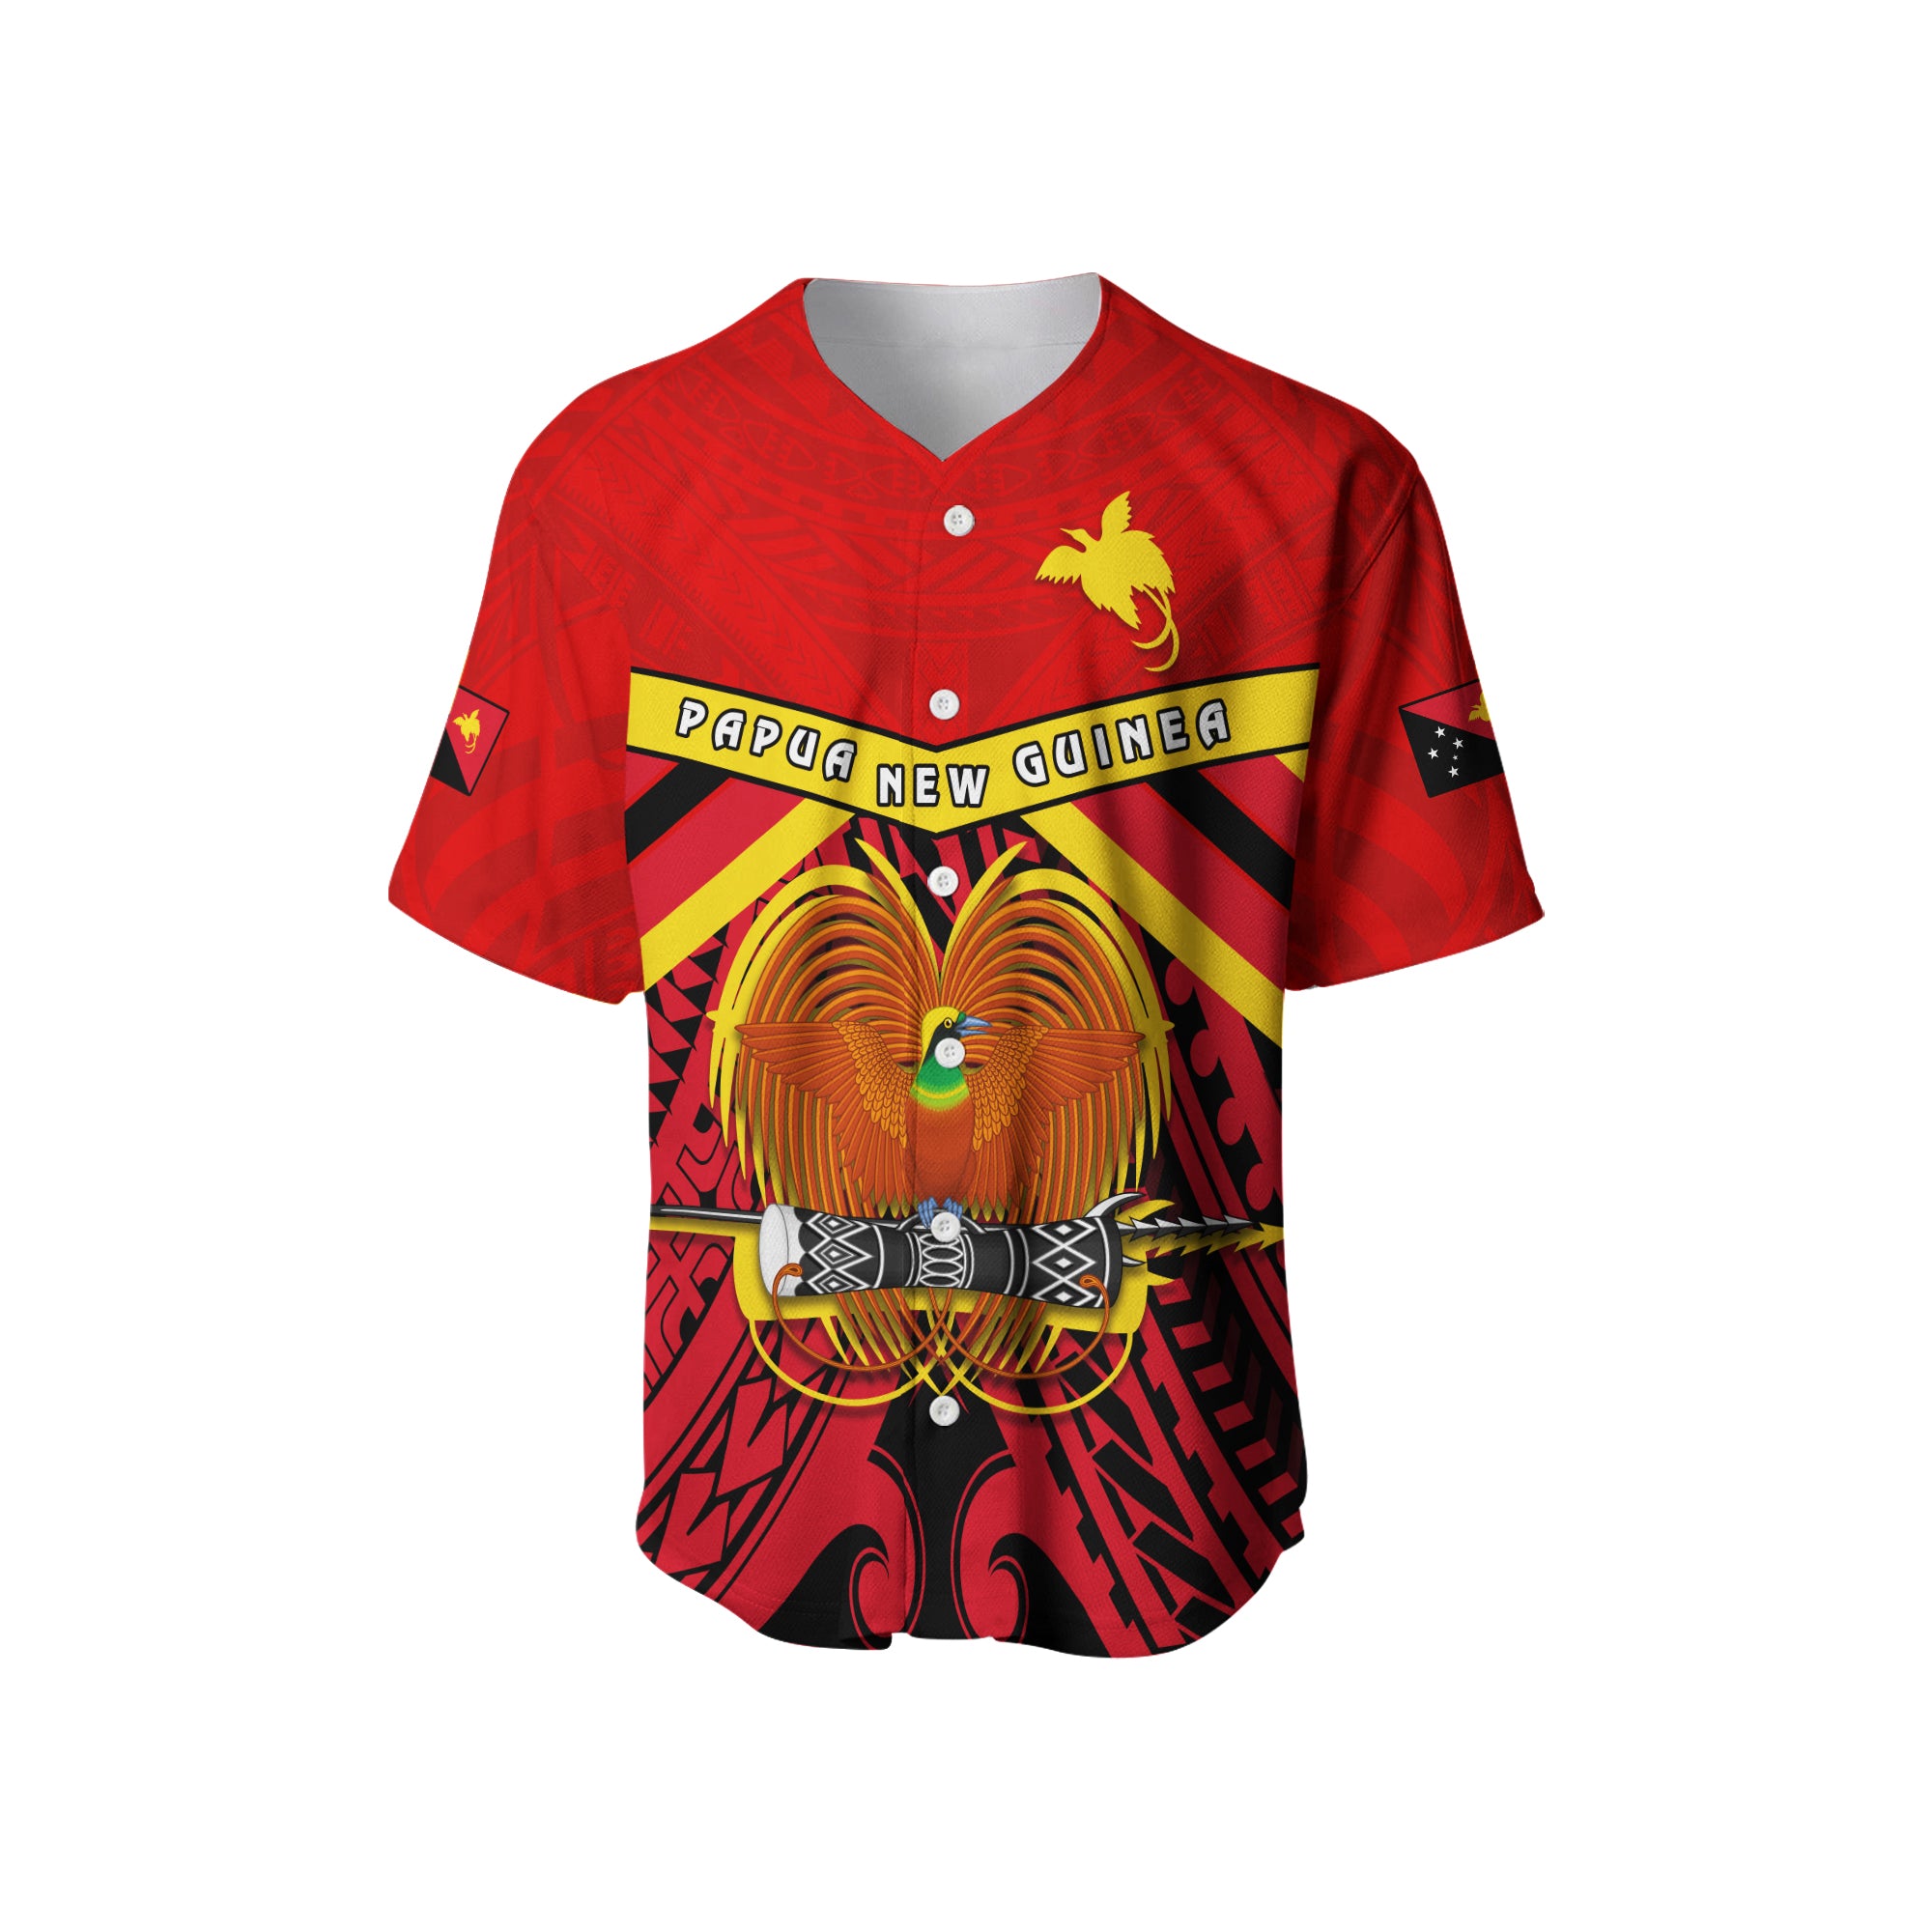 Papua New Guinea Baseball Jersey the One and Only LT13 - Polynesian Pride